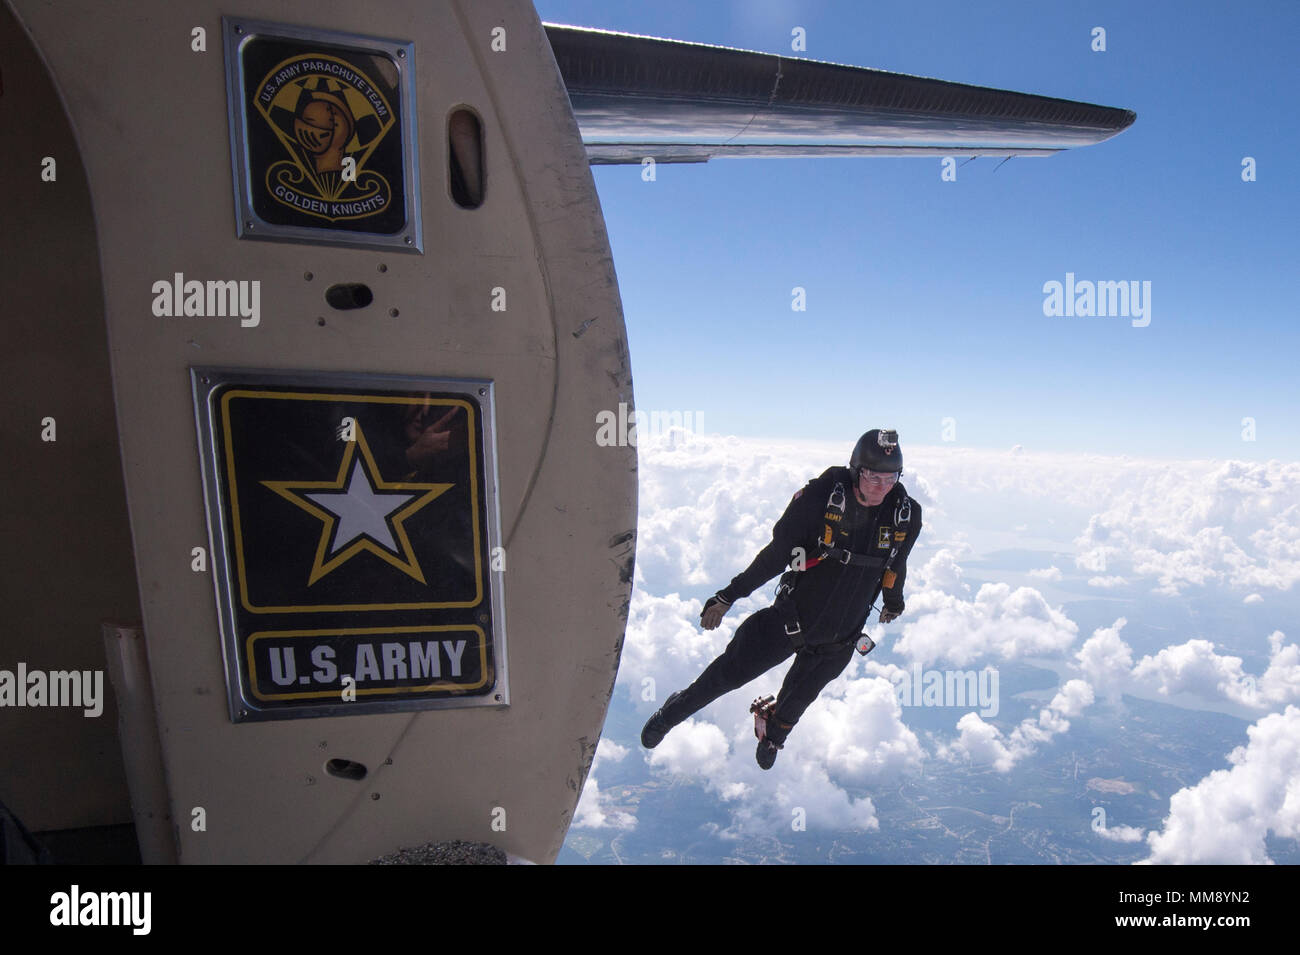 JOINT BASE ANDREWS, Md. -Sergeant First Class, Brian Karst, a  member of the United States Army Parachute Team, the 'Golden Knights,' takes part in a demonstration jump over Joint Base Andrews during the annual Joint Base Andrws Air Show on September 17, 2017.    A variety of presentations from military services and other organizations will be present including the KC-135, the F-16 Fighting Falcon, NASA’s Super Guppy, and the UH-1N Iroquois.    US Air National Guard Photo by Staff Sgt. Christopher S. Muncy Stock Photo